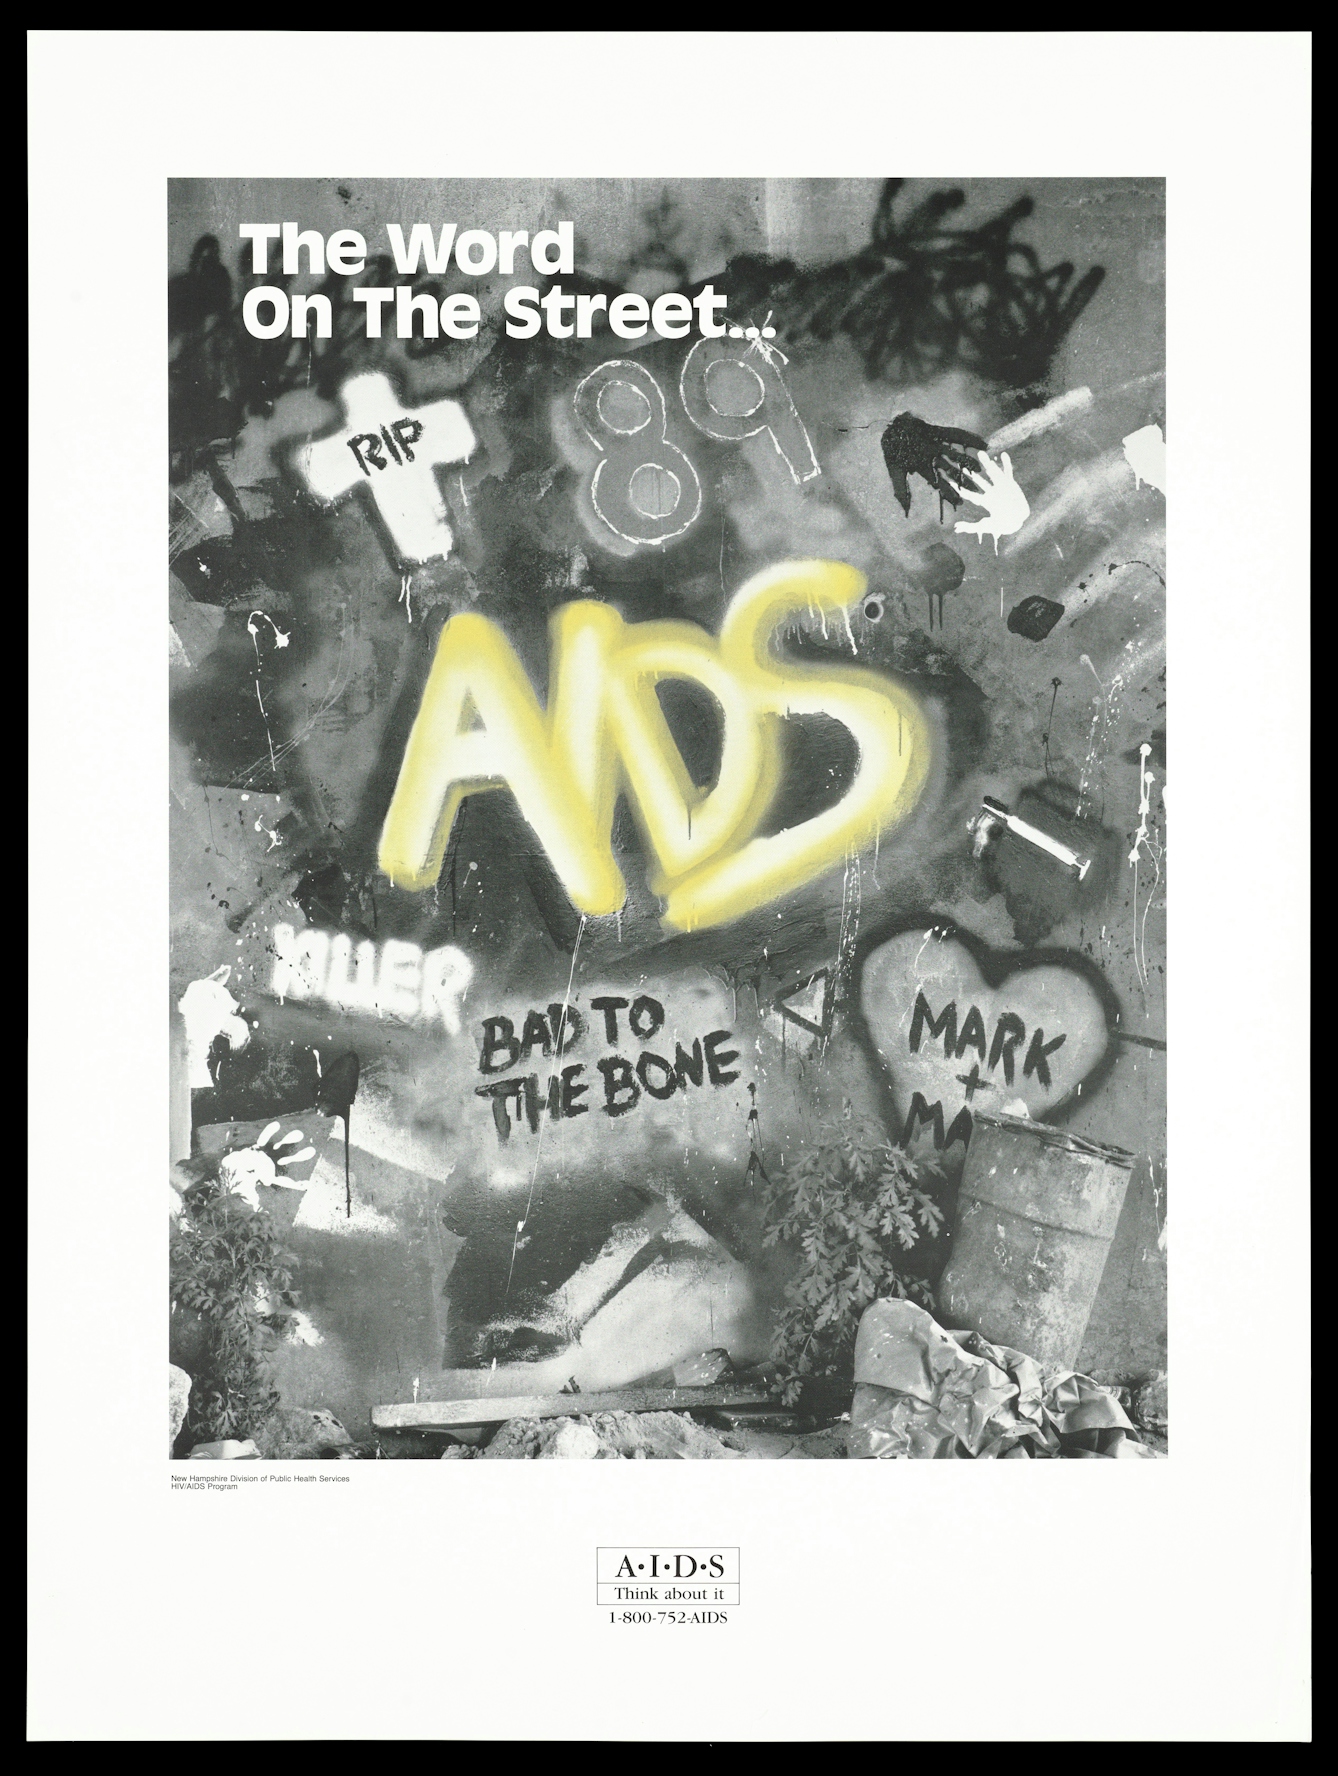 Graffiti about AIDS representing an advertisment for the HIV/AIDS program by the New Hampshire Division of Public Health Services. Lithograph, printed in black and white with yellow lettering, 1989.